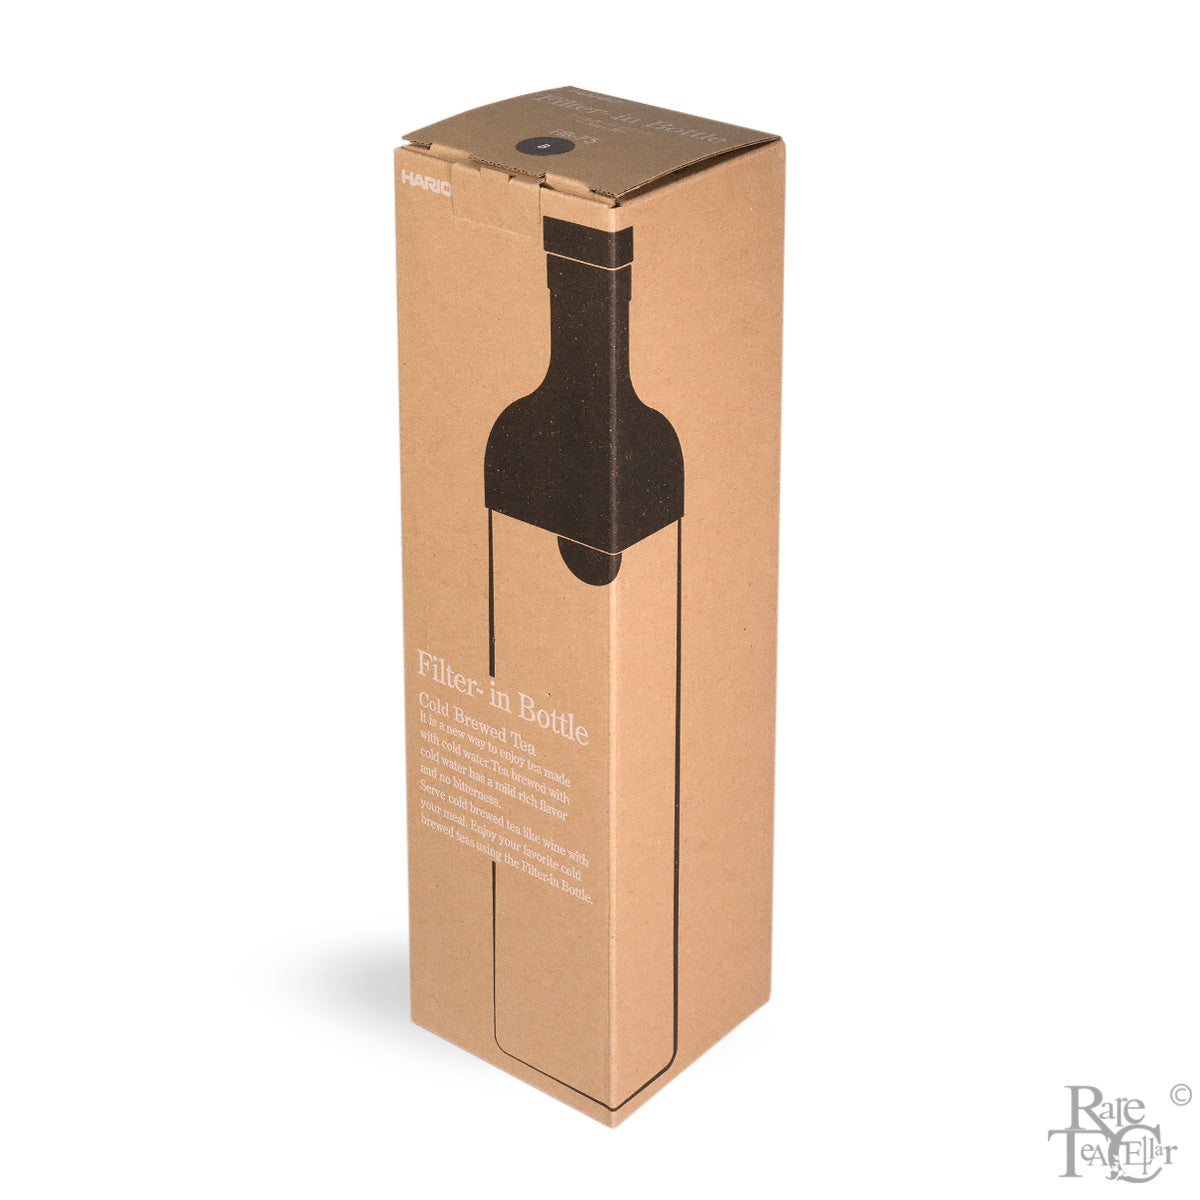 Hario Cold Brew Filter-In Tea Bottle 750ml Red